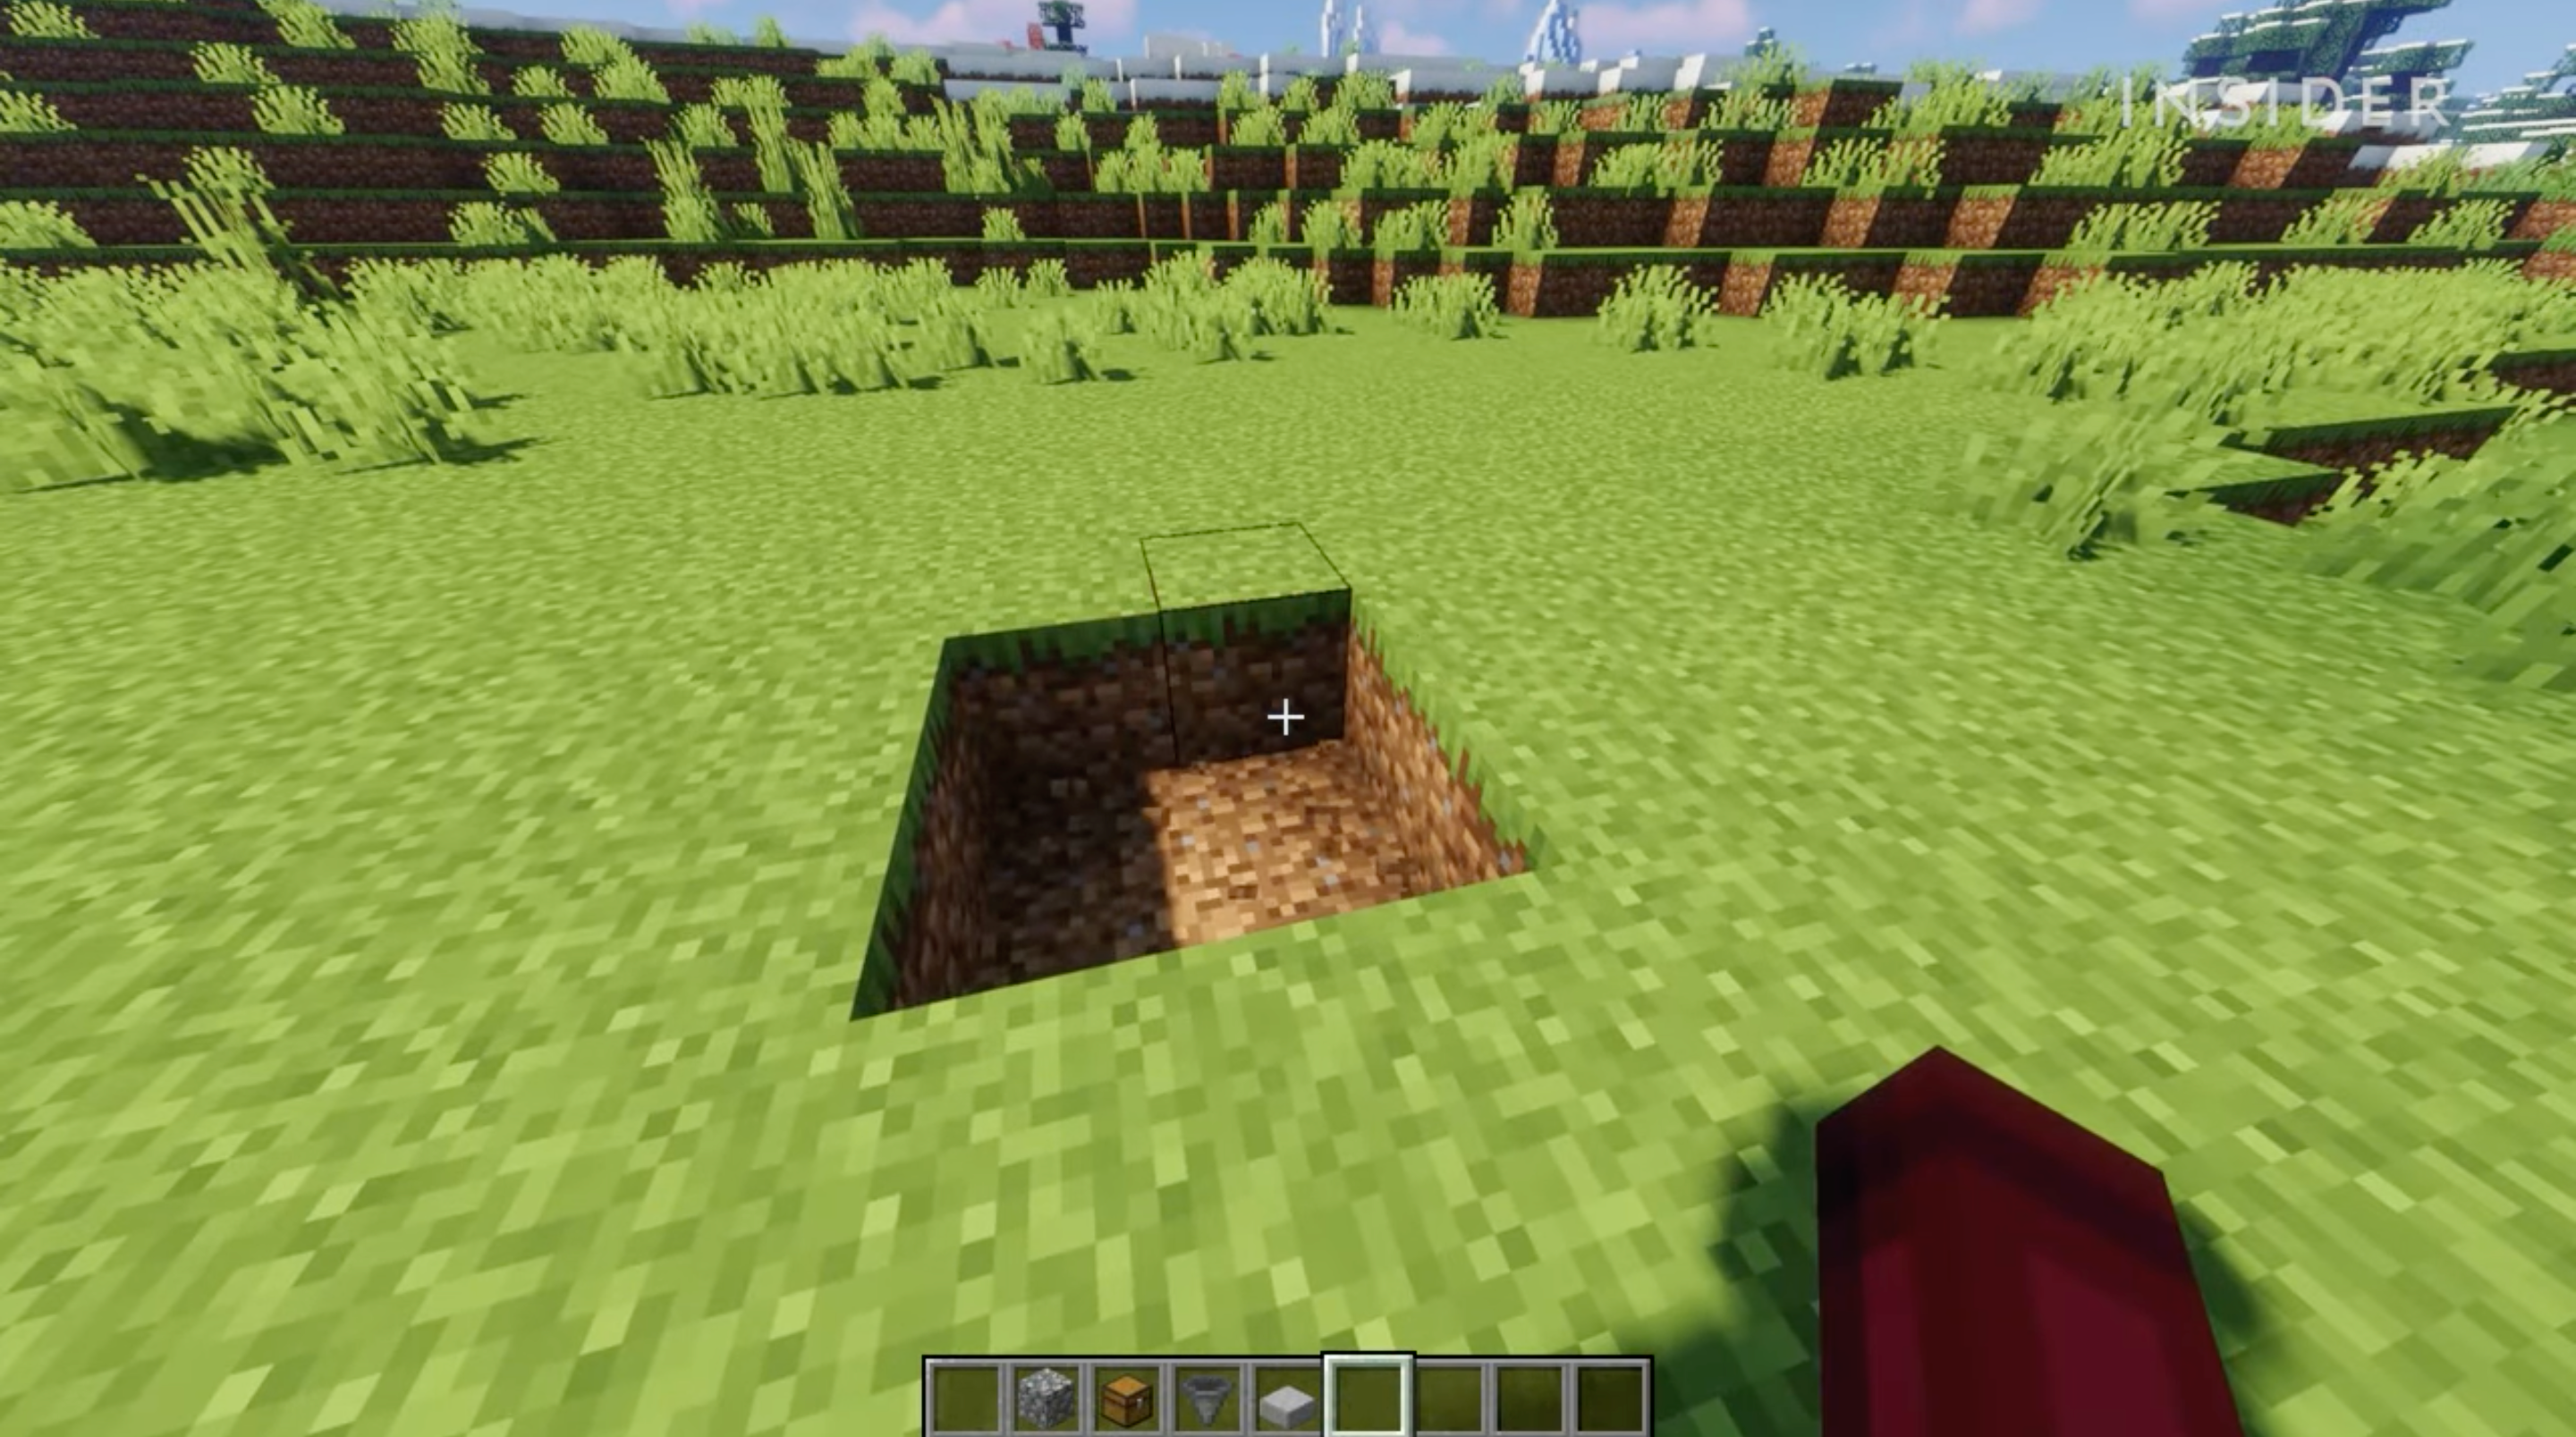 A 2x2 hole in Minecraft.